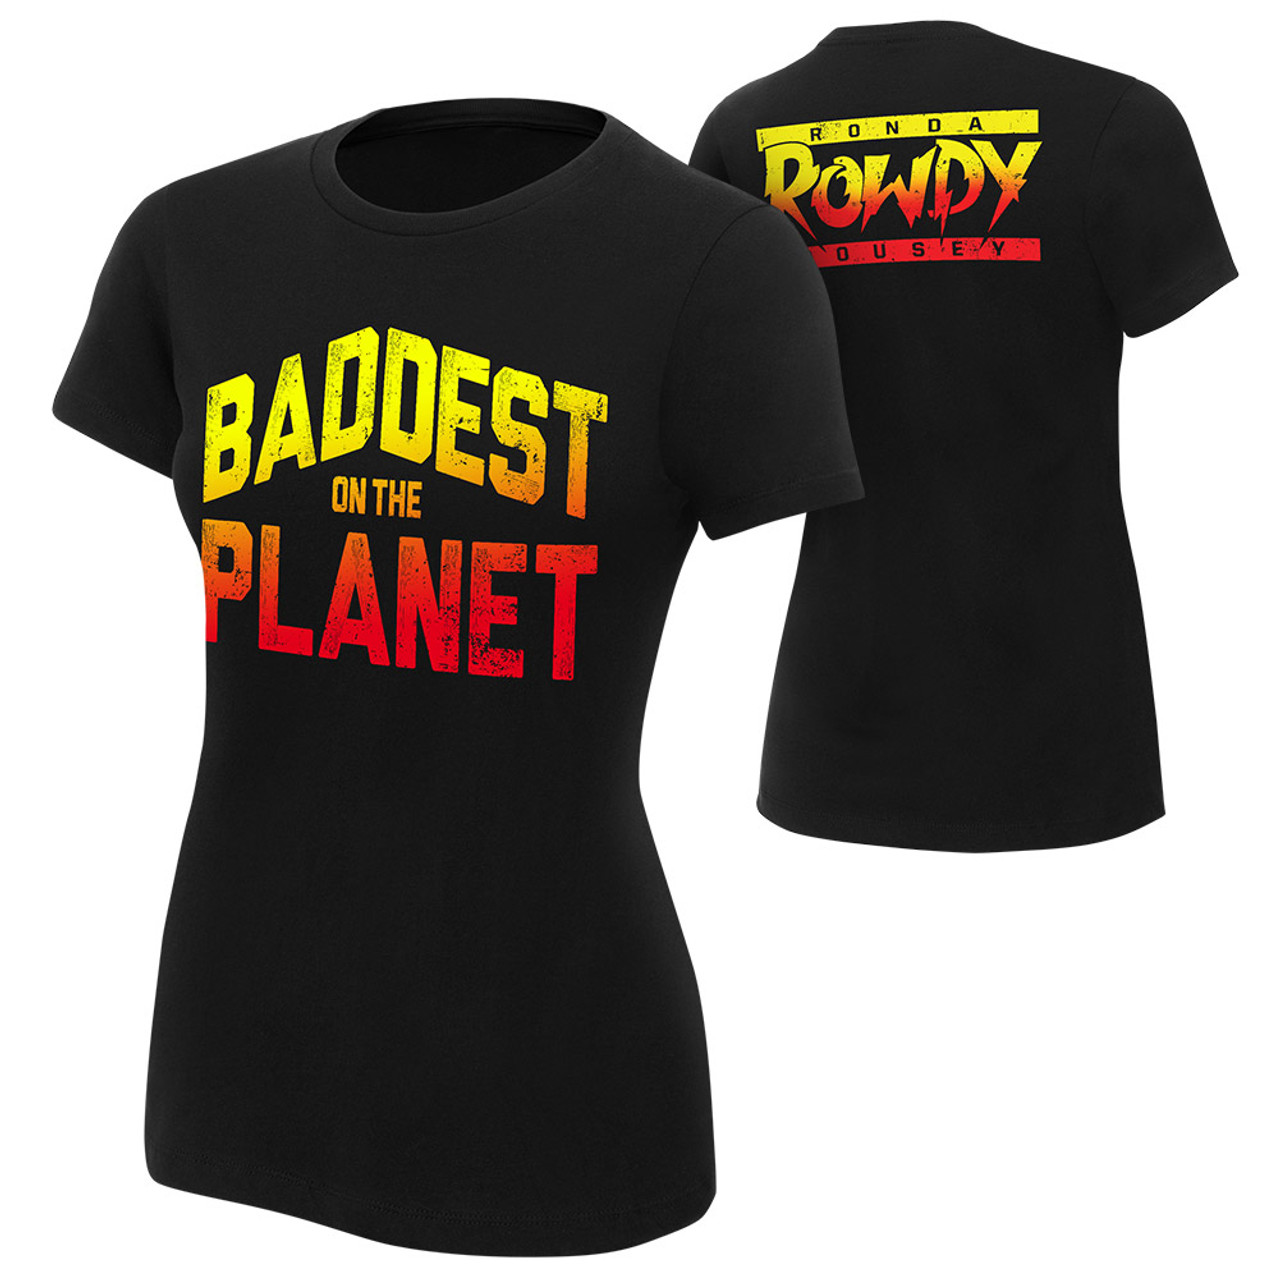 WWE Ronda Rousey On The Planet" Authentic Womens T-Shirt